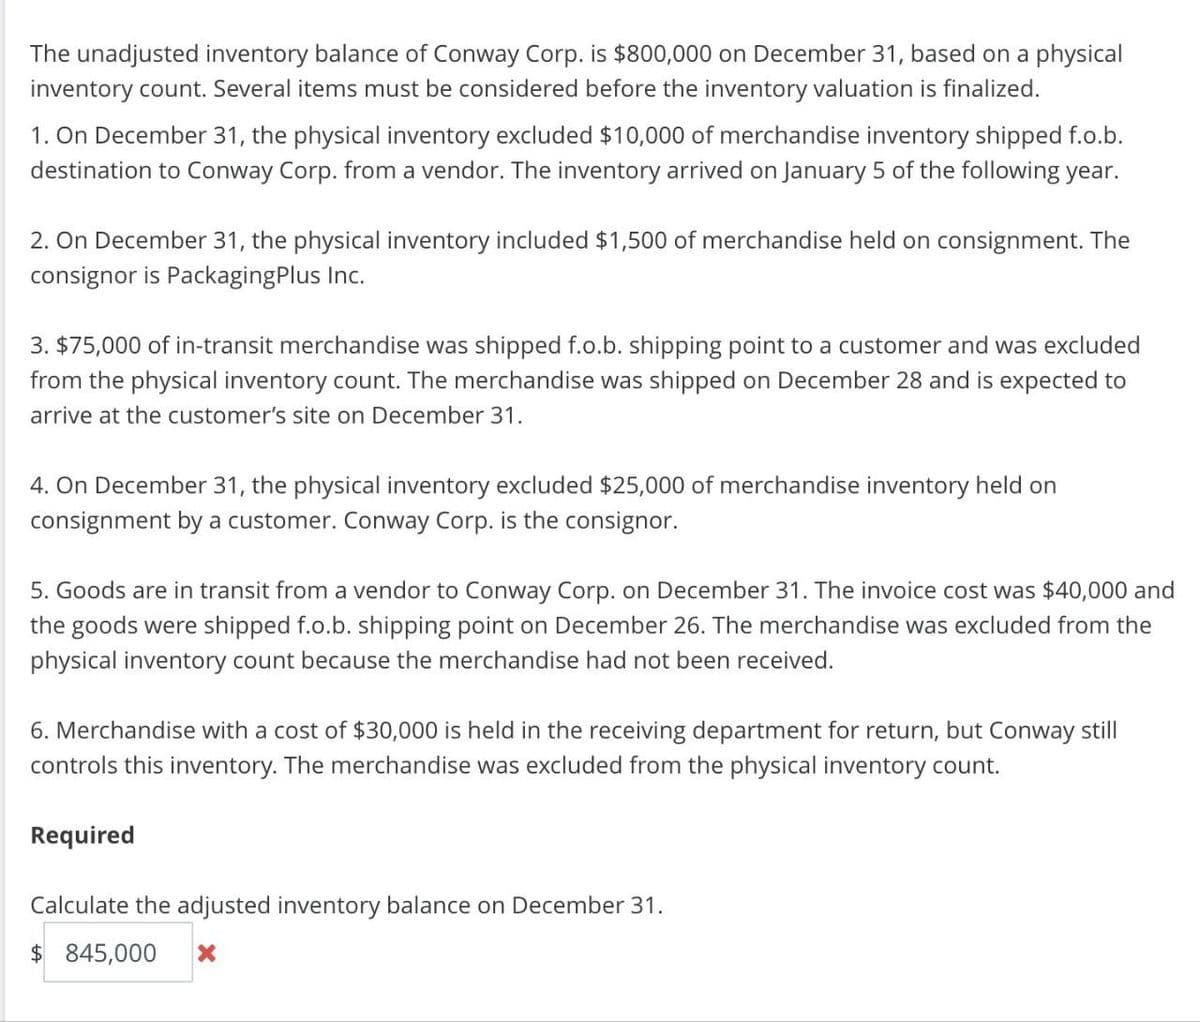 The unadjusted inventory balance of Conway Corp. is $800,000 on December 31, based on a physical
inventory count. Several items must be considered before the inventory valuation is finalized.
1. On December 31, the physical inventory excluded $10,000 of merchandise inventory shipped f.o.b.
destination to Conway Corp. from a vendor. The inventory arrived on January 5 of the following year.
2. On December 31, the physical inventory included $1,500 of merchandise held on consignment. The
consignor is PackagingPlus Inc.
3. $75,000 of in-transit merchandise was shipped f.o.b. shipping point to a customer and was excluded
from the physical inventory count. The merchandise was shipped on December 28 and is expected to
arrive at the customer's site on December 31.
4. On December 31, the physical inventory excluded $25,000 of merchandise inventory held on
consignment by a customer. Conway Corp. is the consignor.
5. Goods are in transit from a vendor to Conway Corp. on December 31. The invoice cost was $40,000 and
the goods were shipped f.o.b. shipping point on December 26. The merchandise was excluded from the
physical inventory count because the merchandise had not been received.
6. Merchandise with a cost of $30,000 is held in the receiving department for return, but Conway still
controls this inventory. The merchandise was excluded from the physical inventory count.
Required
Calculate the adjusted inventory balance on December 31.
$ 845,000